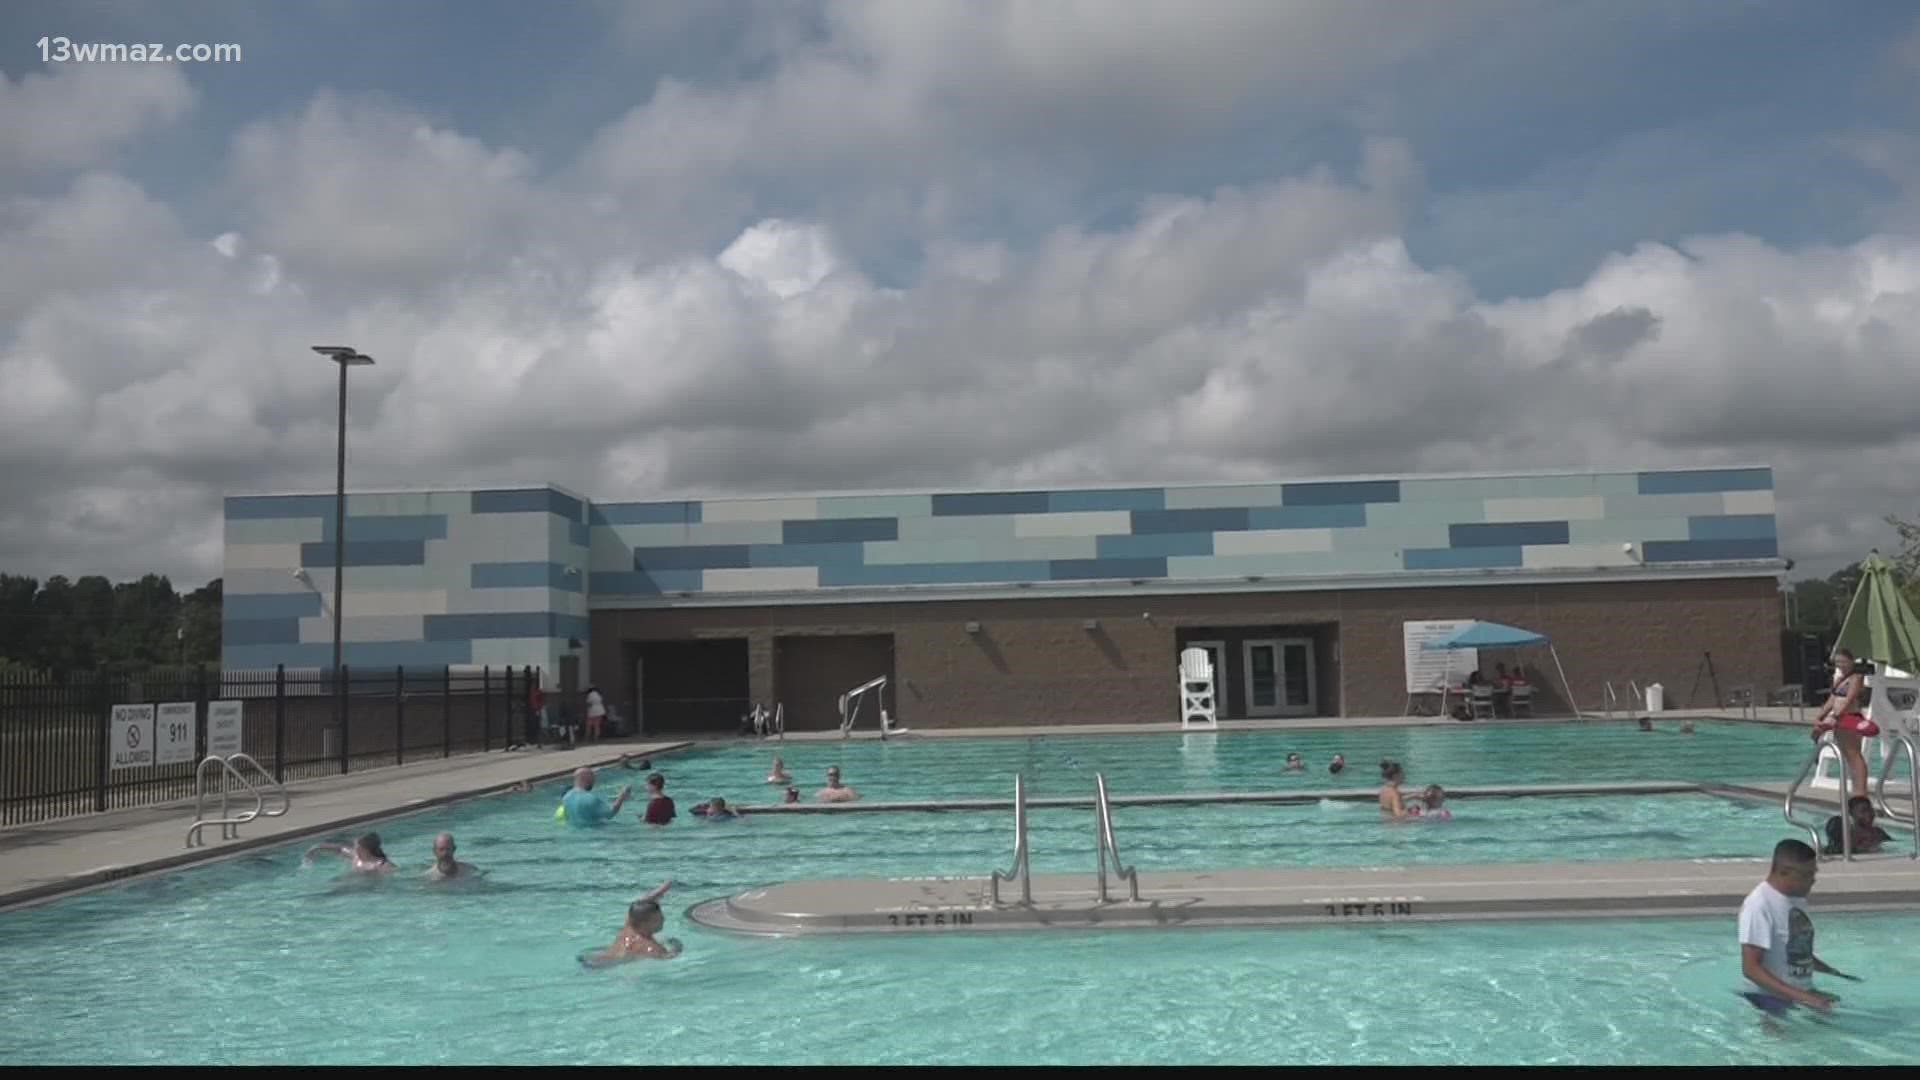 Today was the last day to enjoy one of the 4 recreational public pools before they close for the summer.